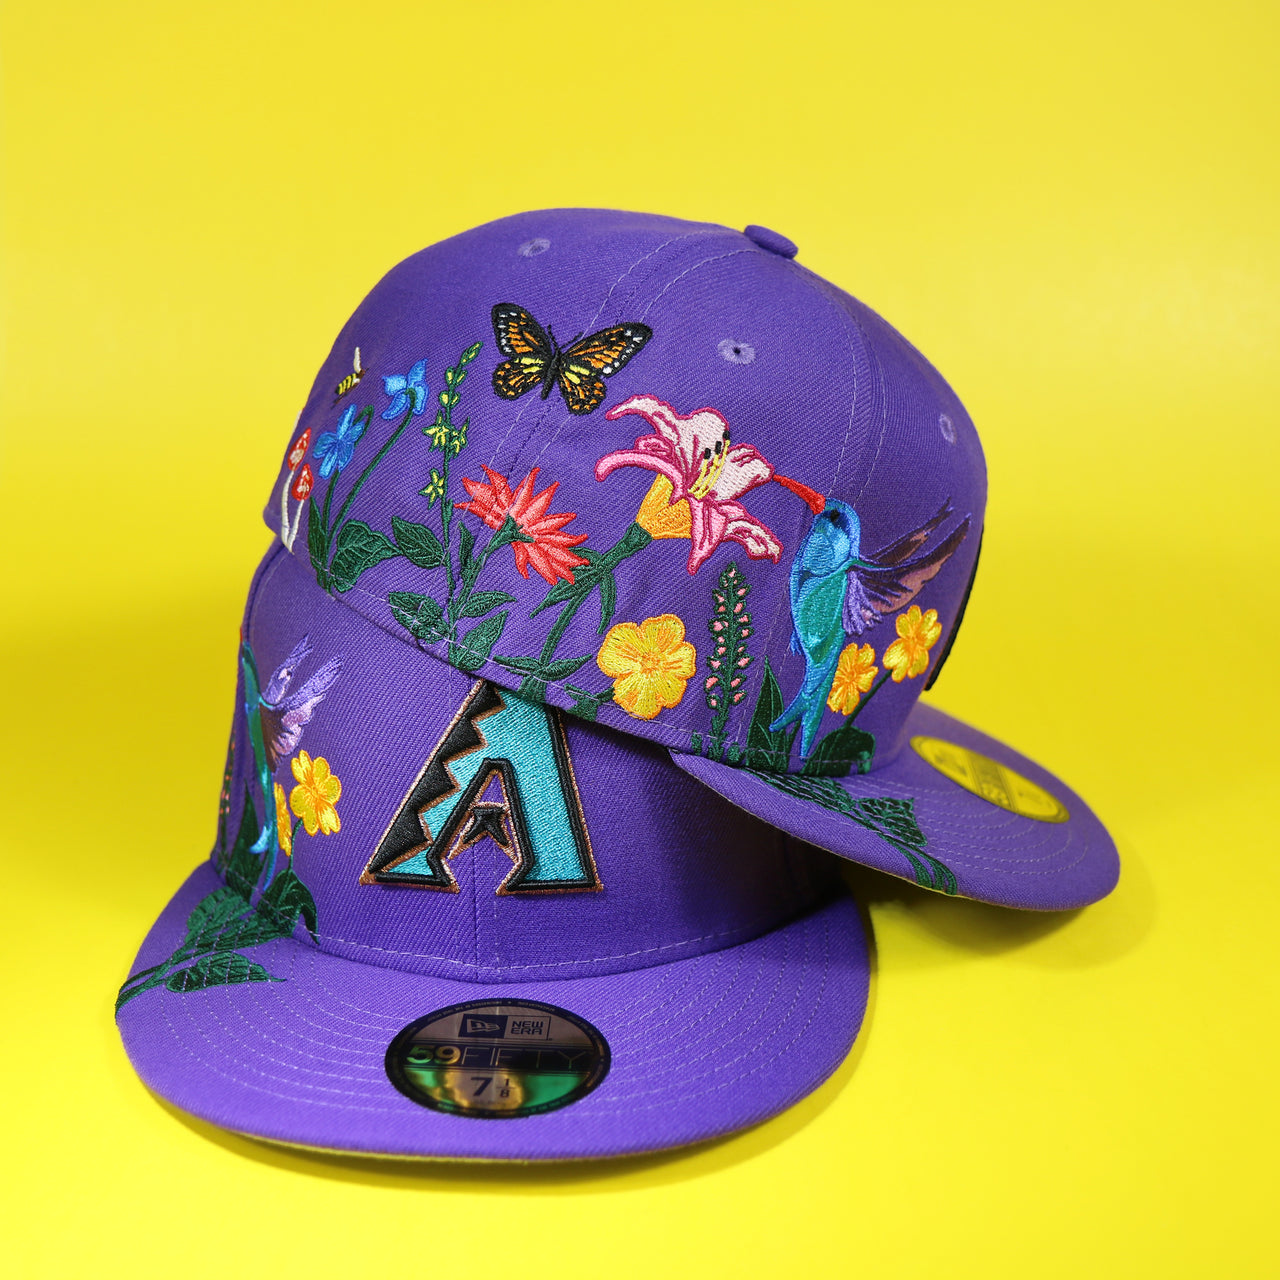 Cooperstown Arizona Diamondbacks Gray Bottom Bloom Spring Embroidery 59Fifty Fitted Cap | Purple 5950 Cap